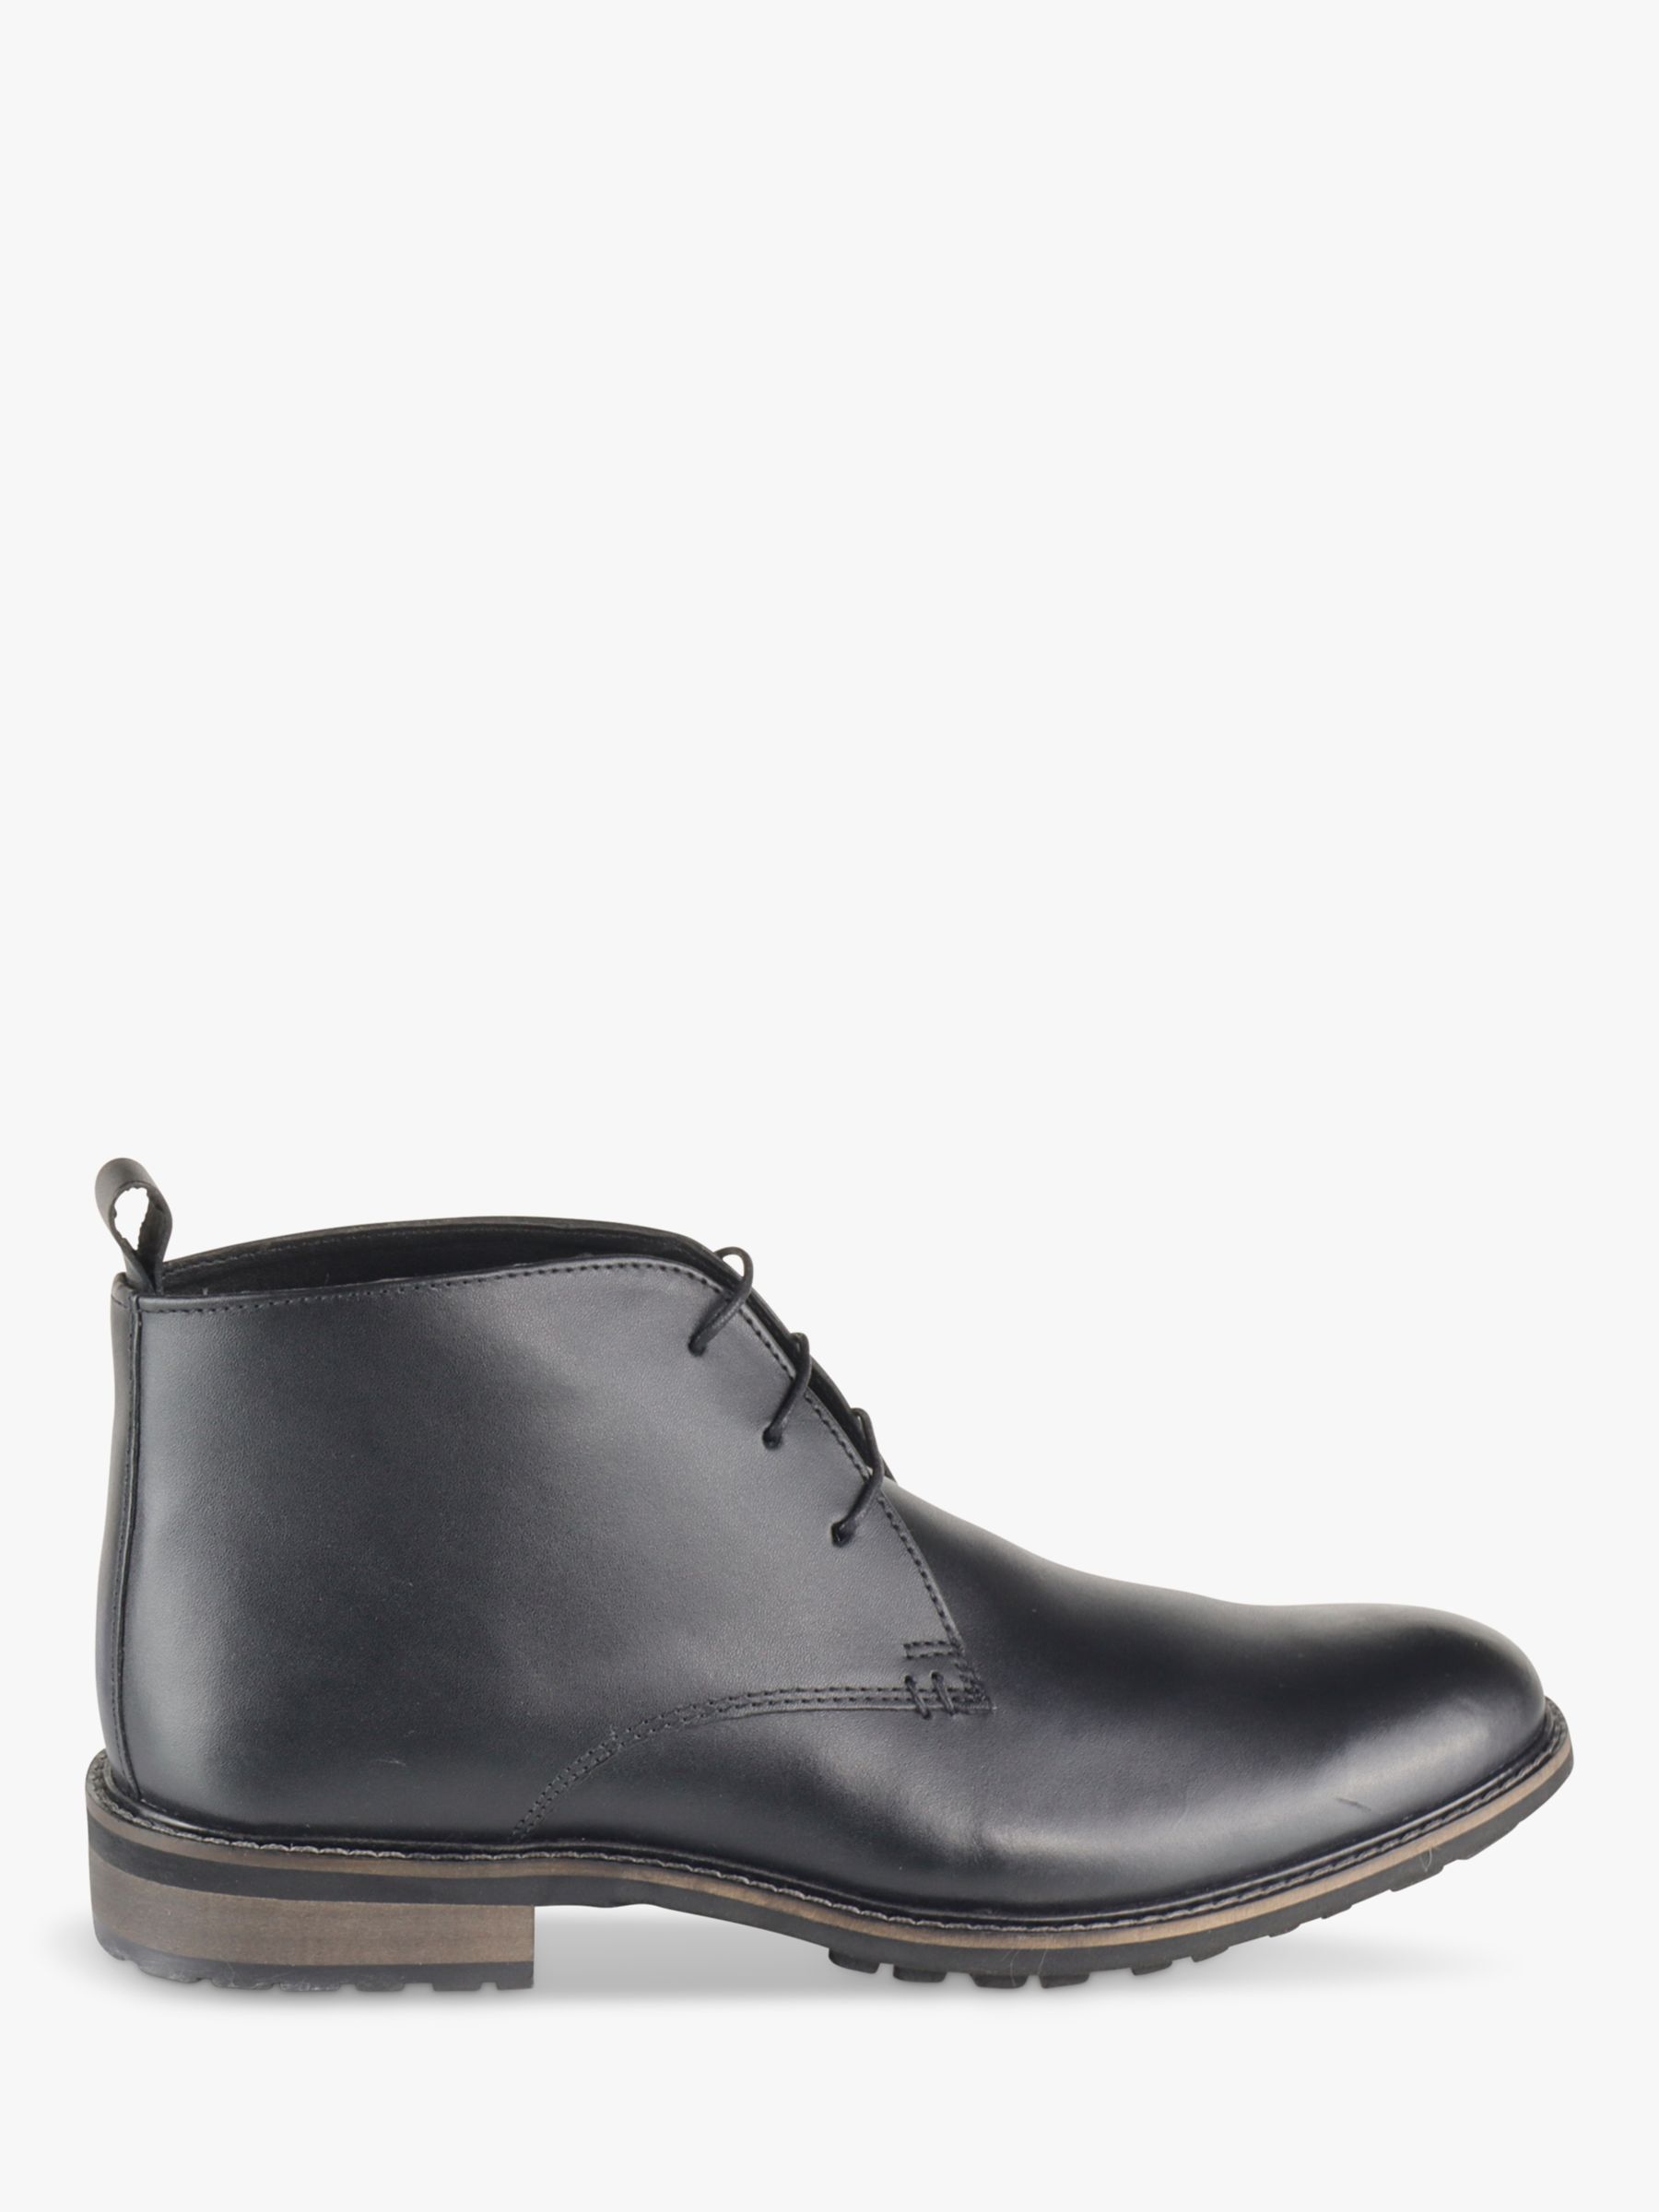 Buy Silver Street London Ludgate Leather Chukka Boots Online at johnlewis.com